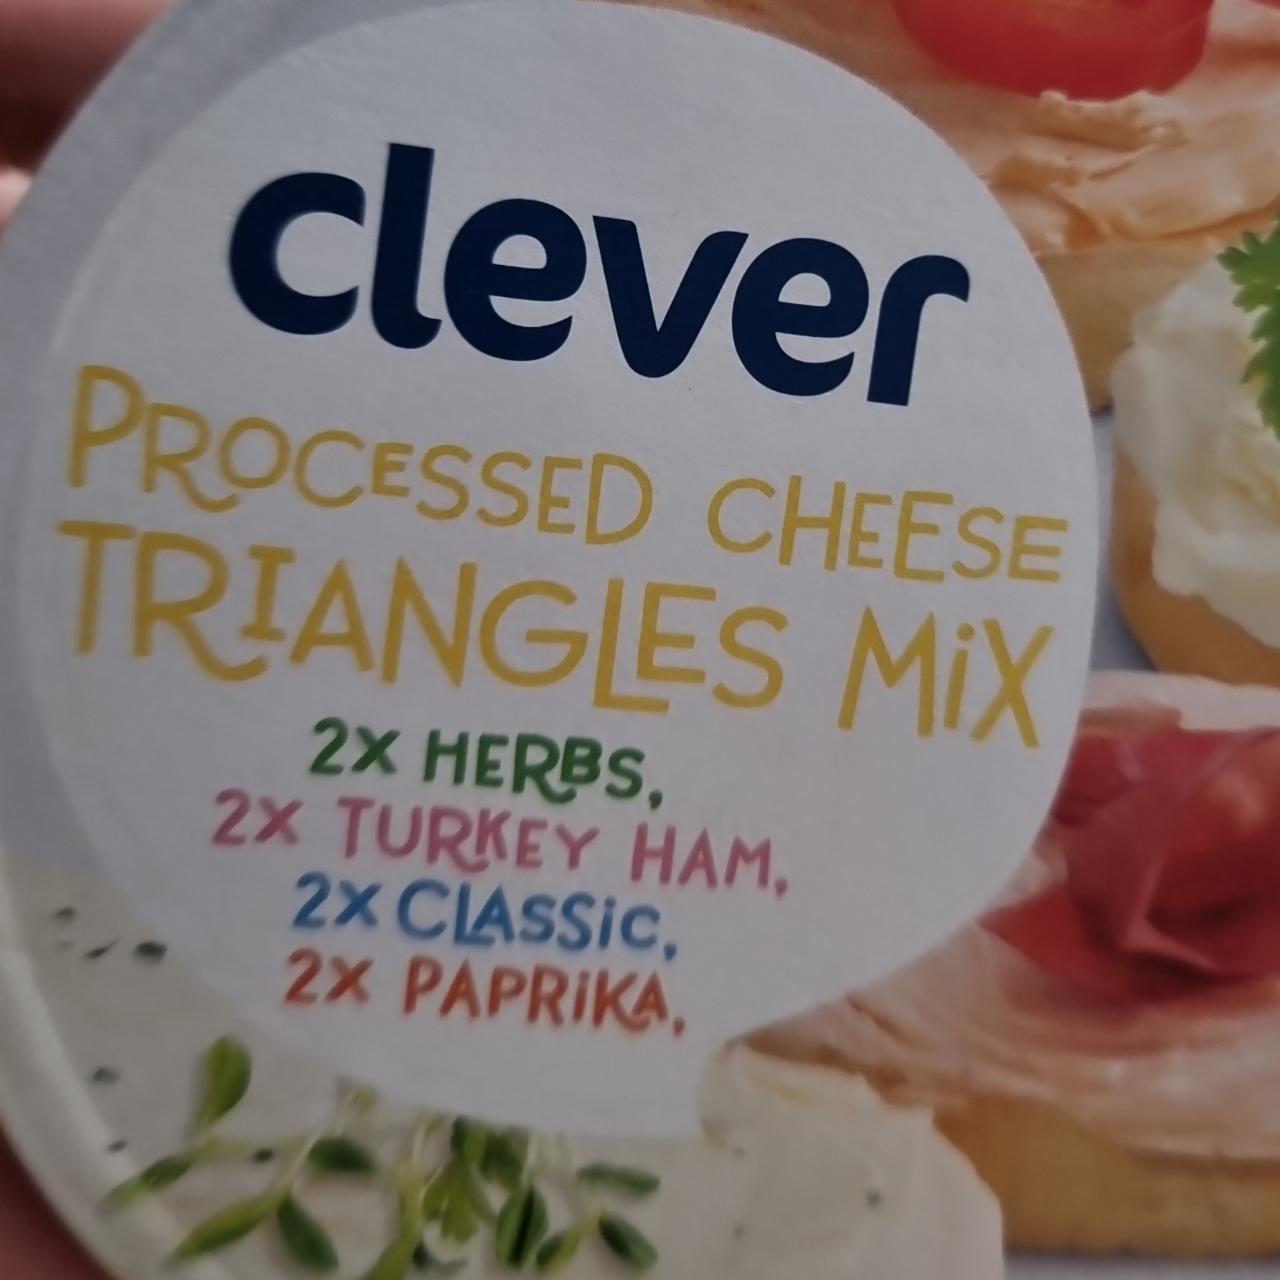 Fotografie - Processed Cheese triangles mix Clever